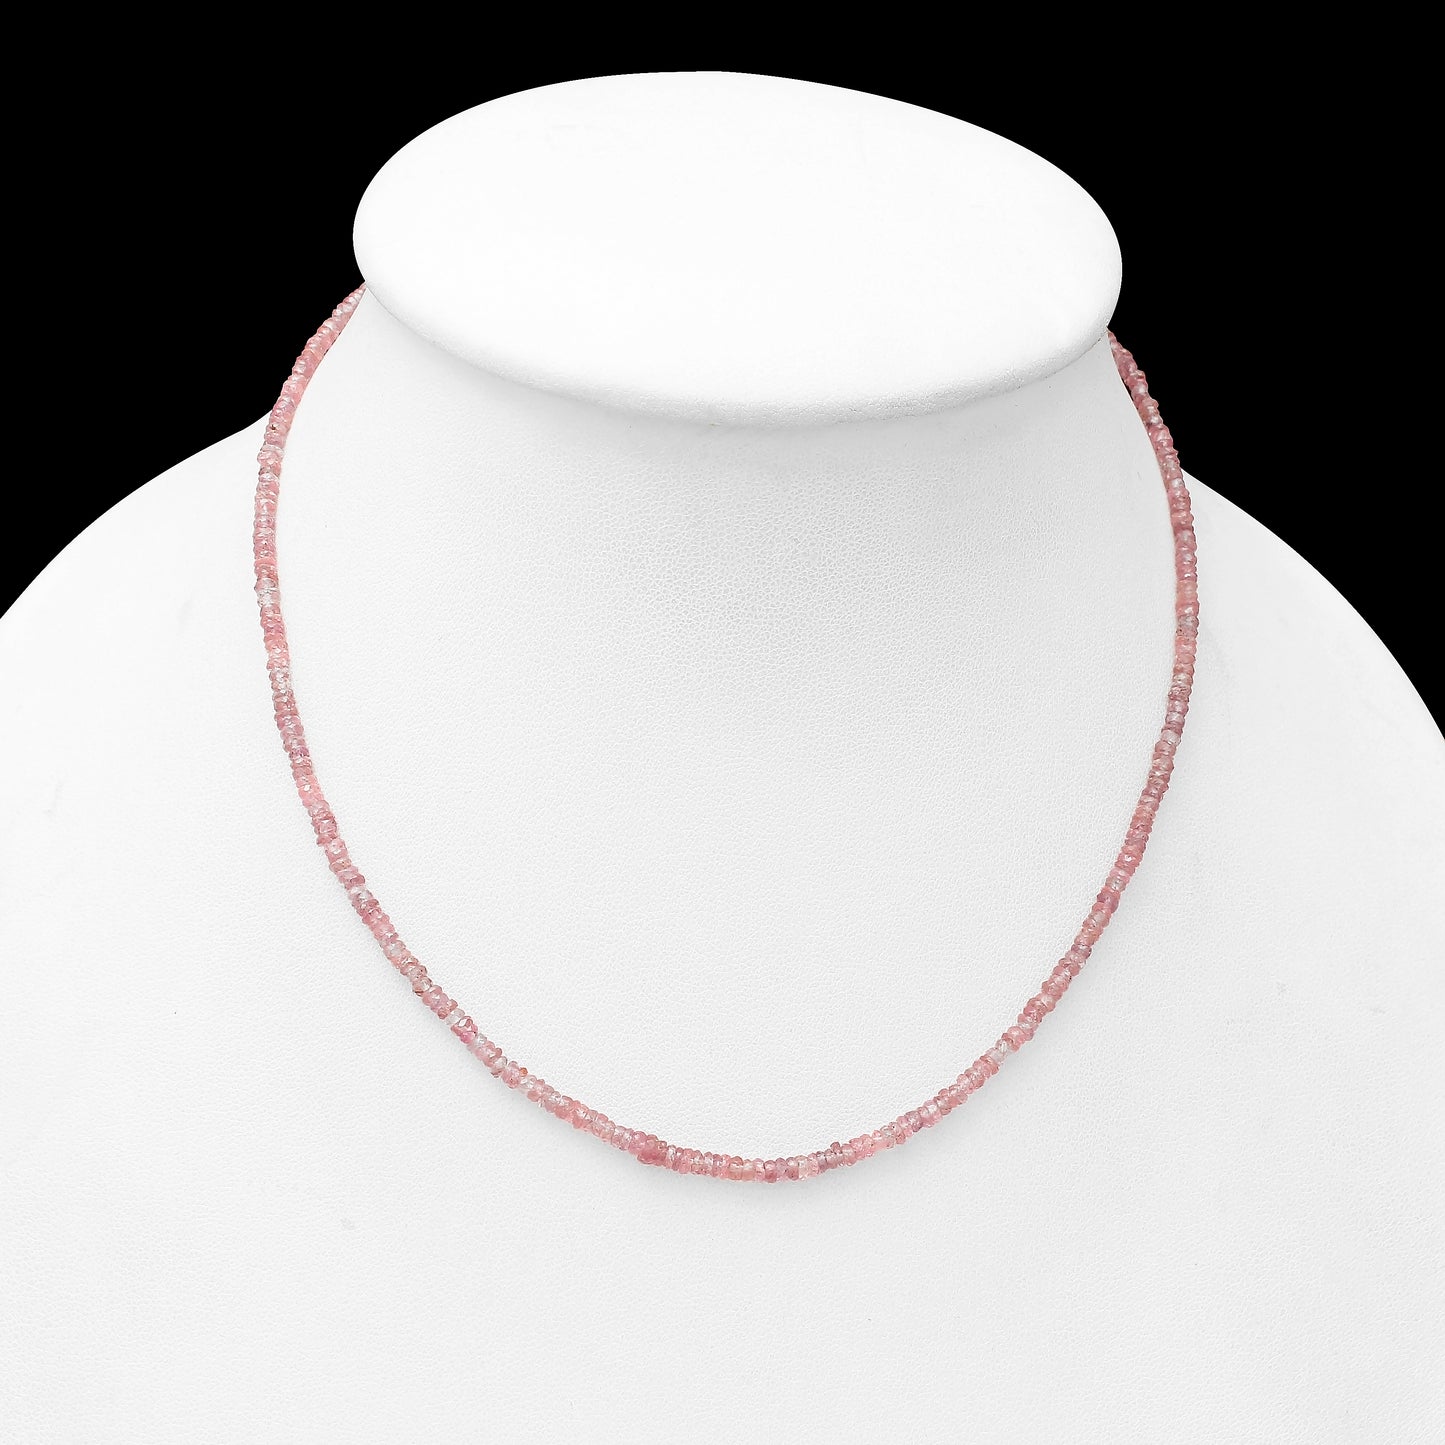 Natural AAA Grade Quality Pink Sapphire Necklace - Handcrafted with 2.5-4mm Sapphire Beads